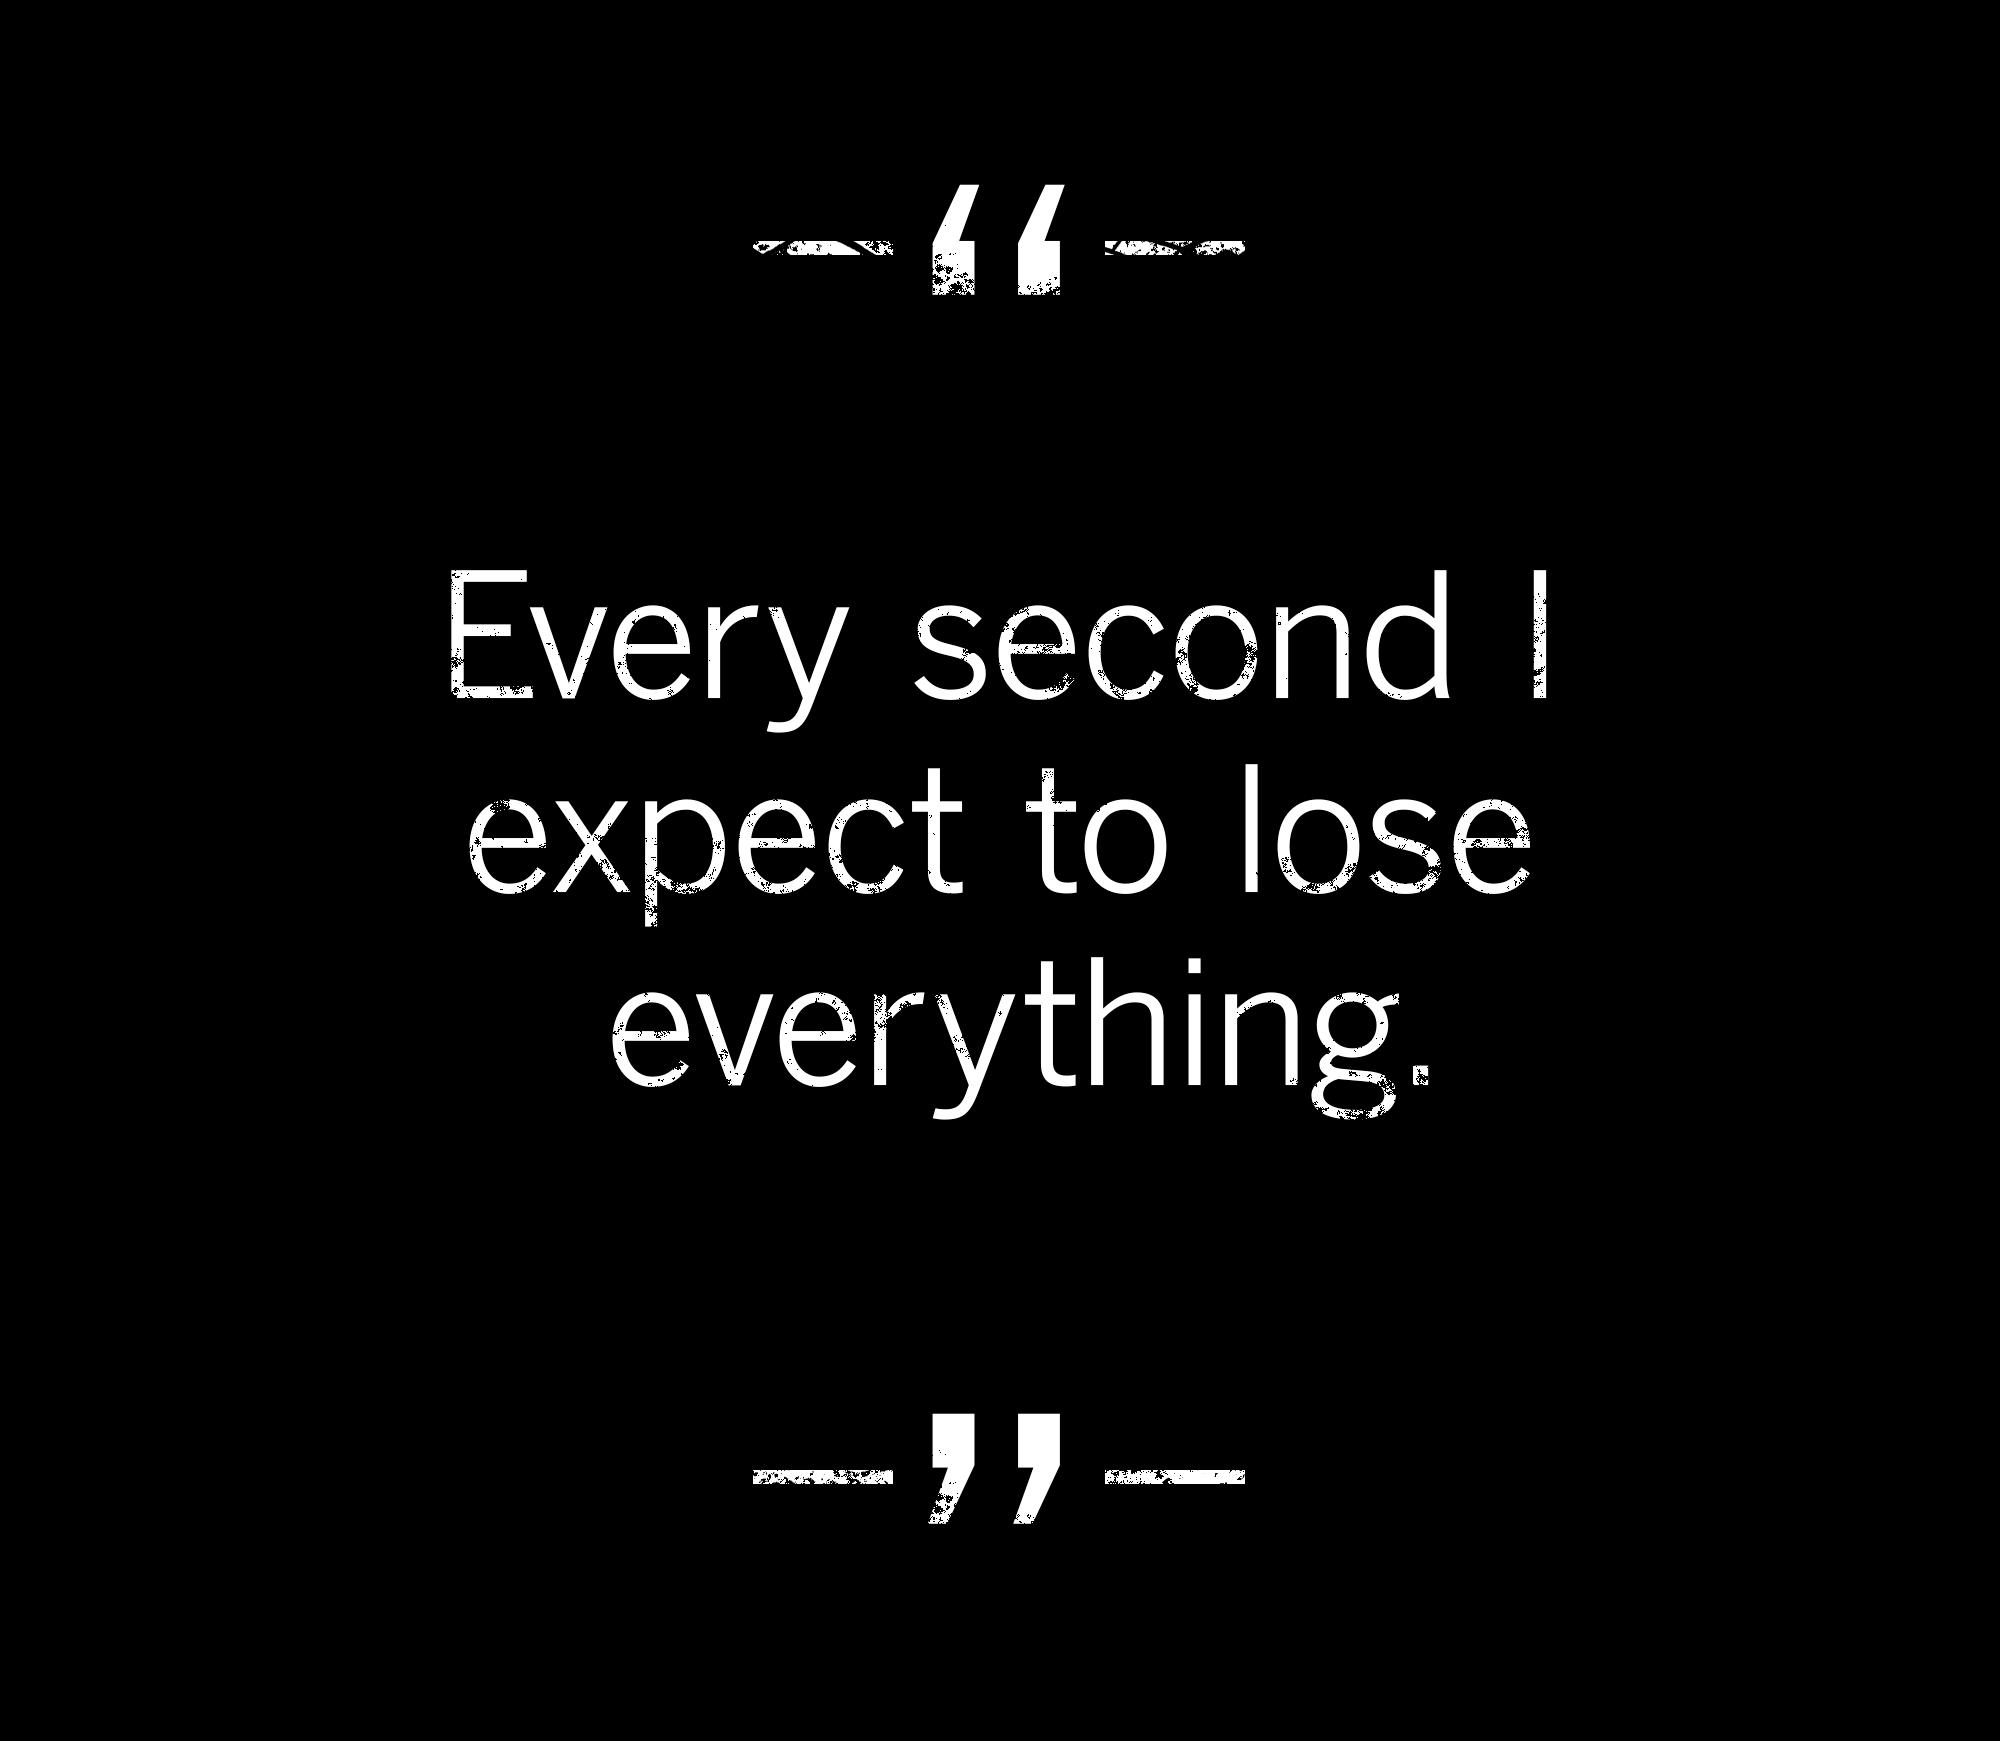 quote: Every second I expect to lose everything